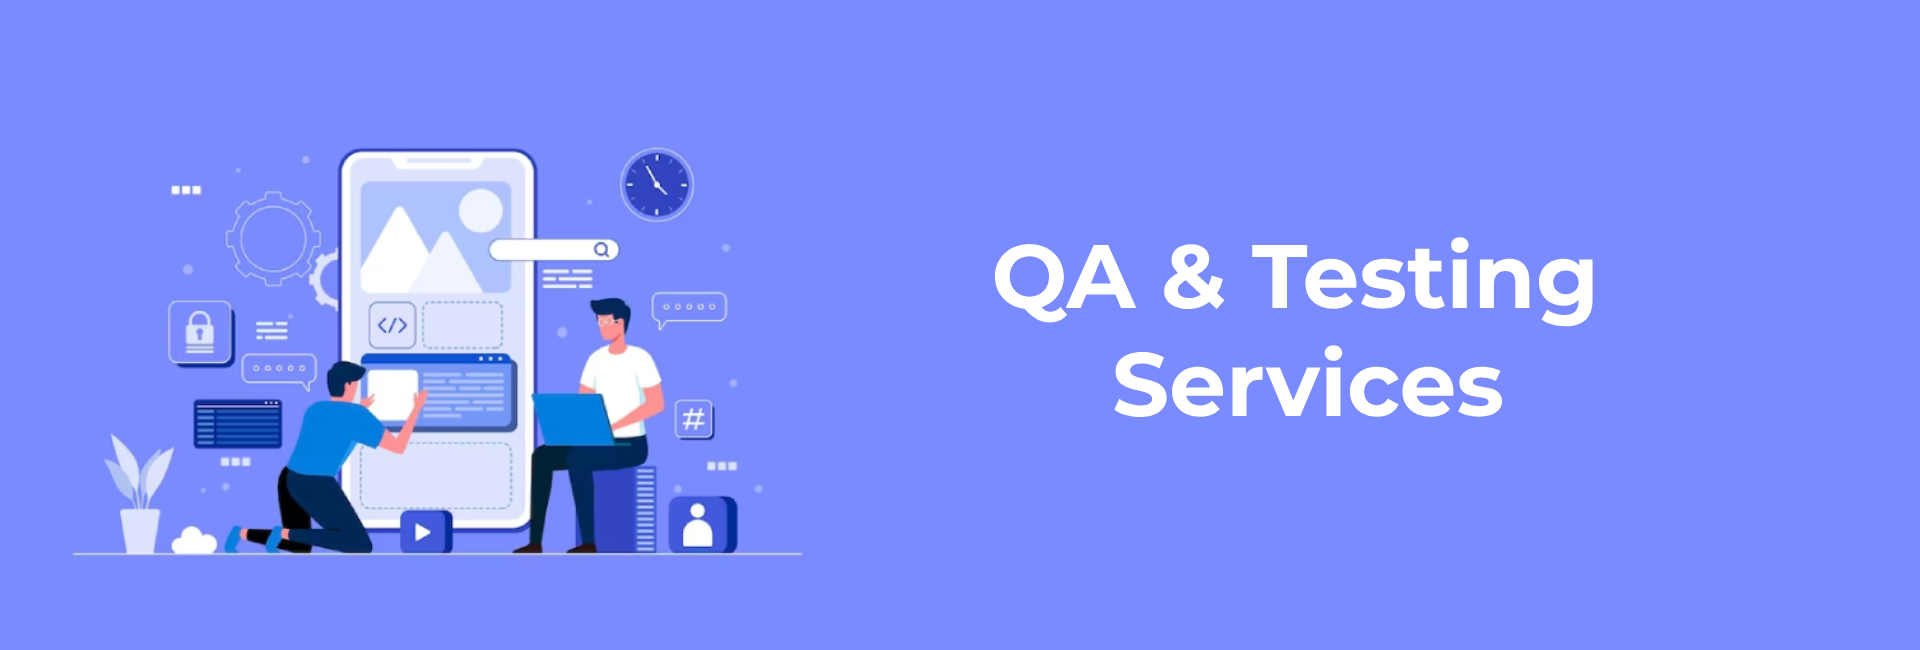 Image of QA & Testing Services